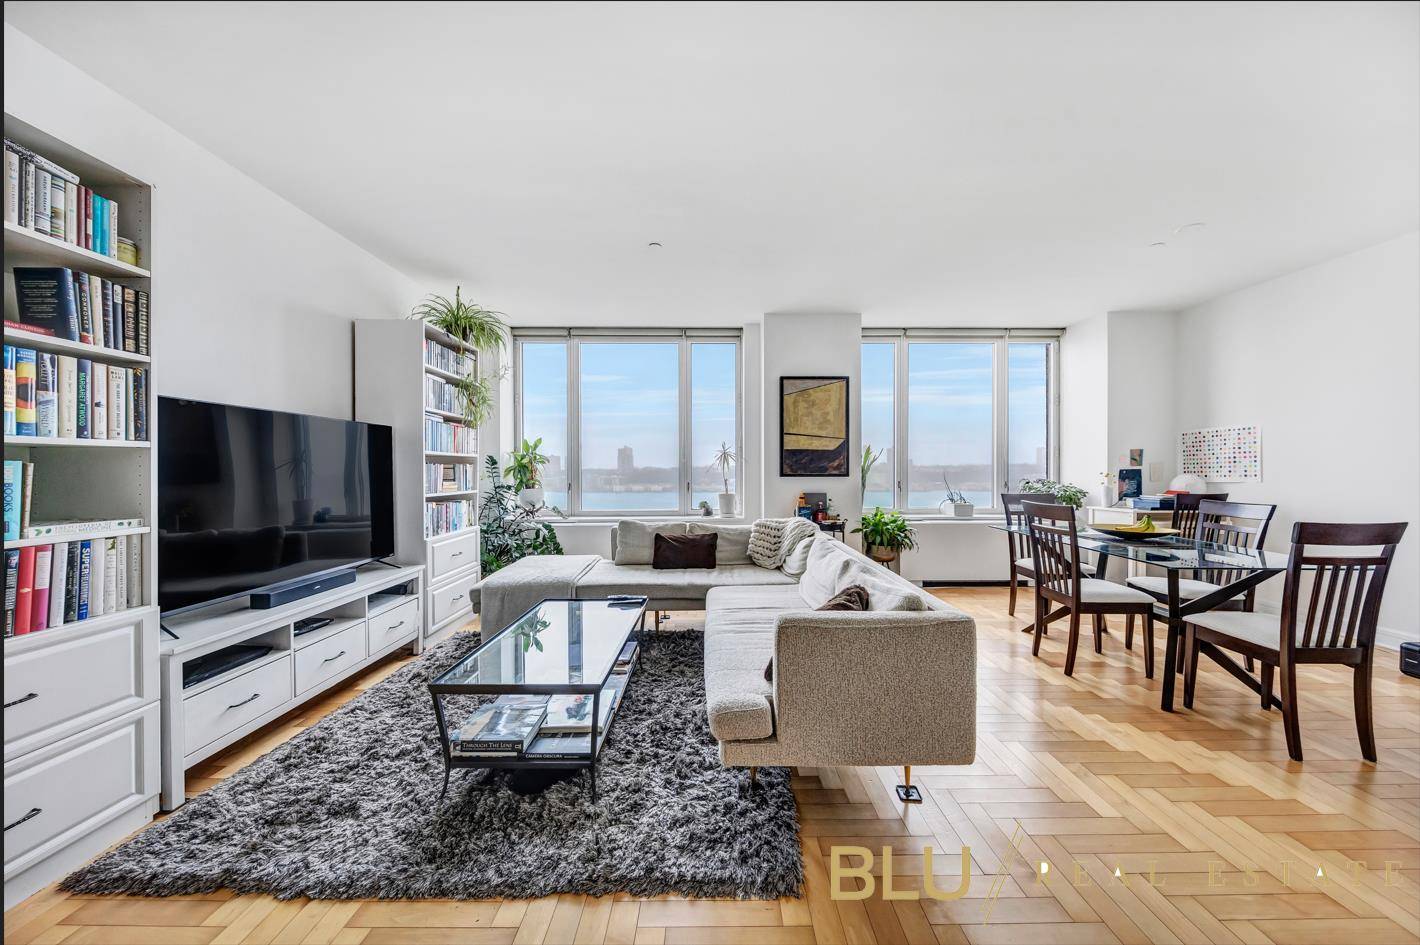 DESCRIPTION Welcome to Apartment 15M at 220 Riverside Boulevard A 2 bedroom, 2 bathroom home where every room offers stunning views of the Hudson River.